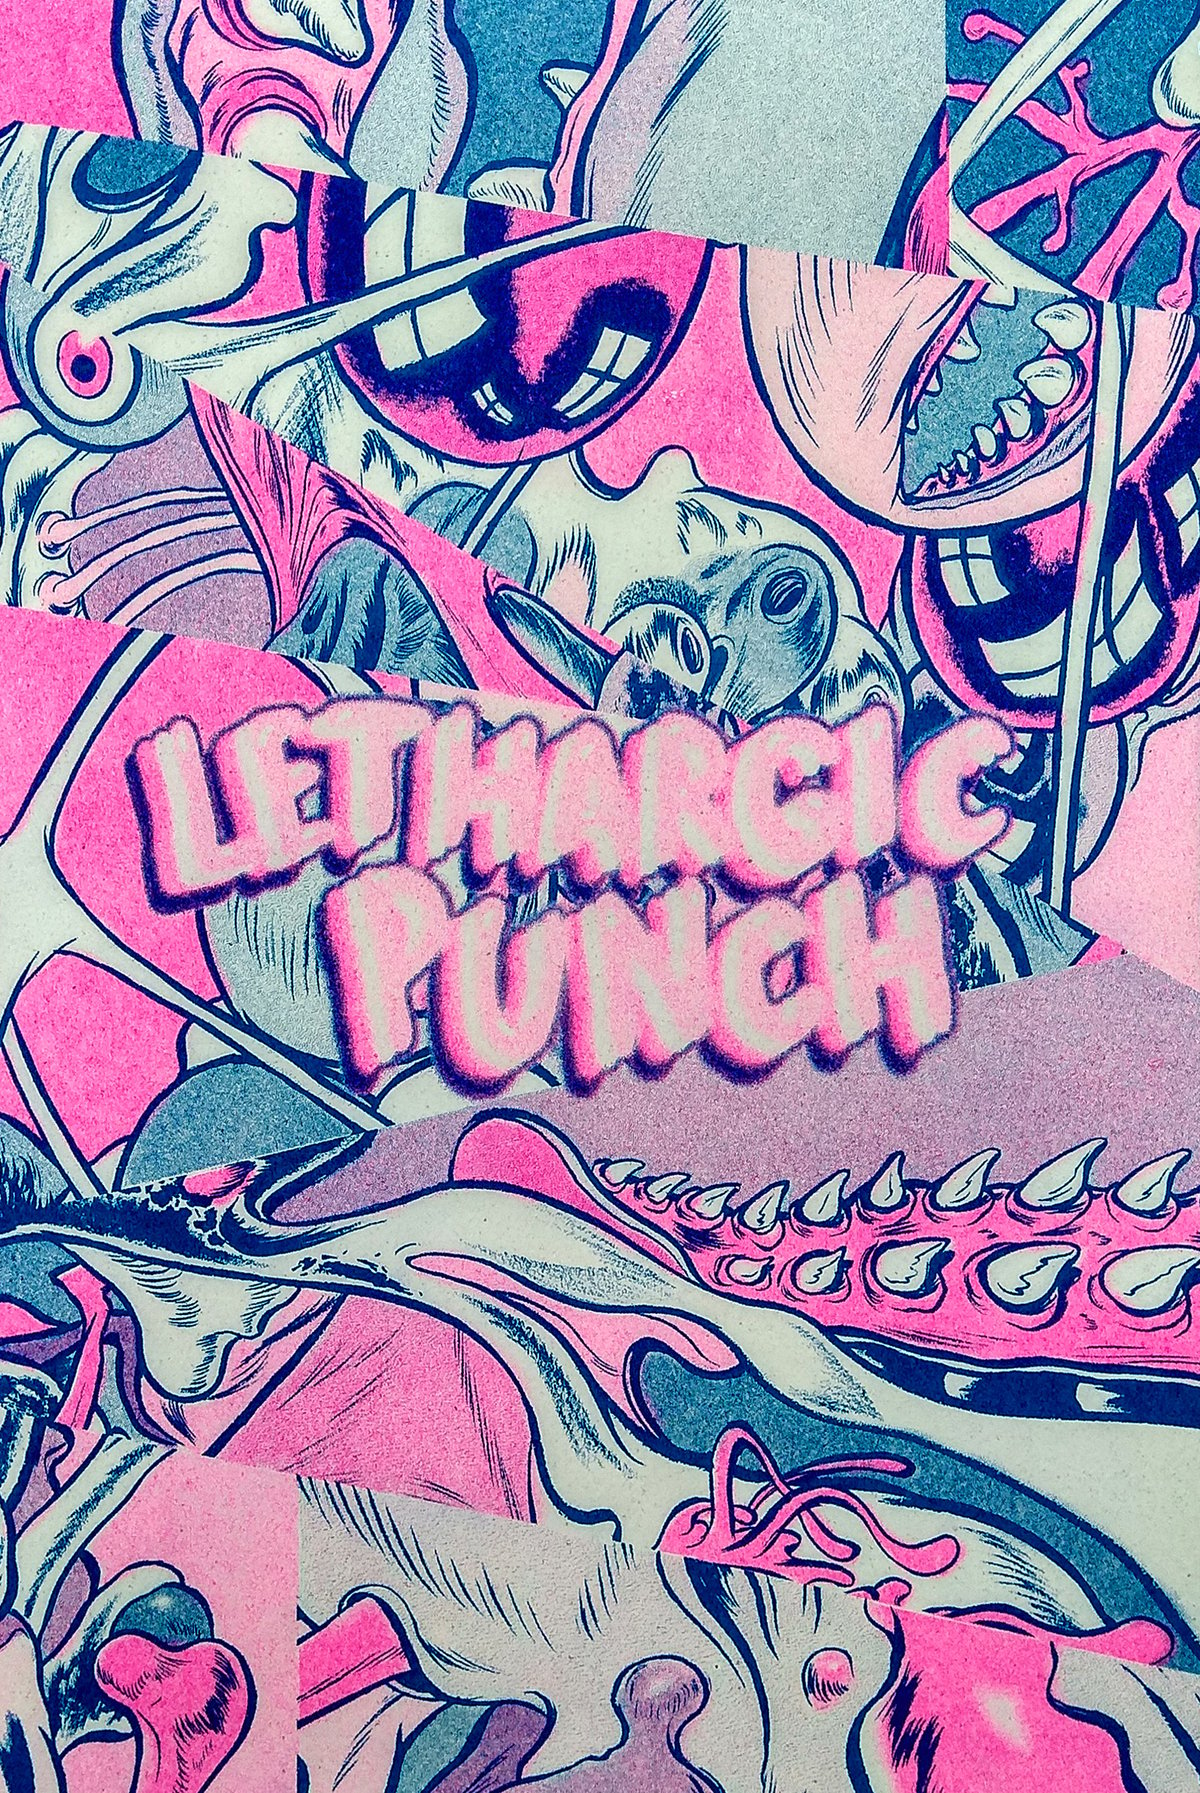 Image of "Lethargic Punch" Risograph Book